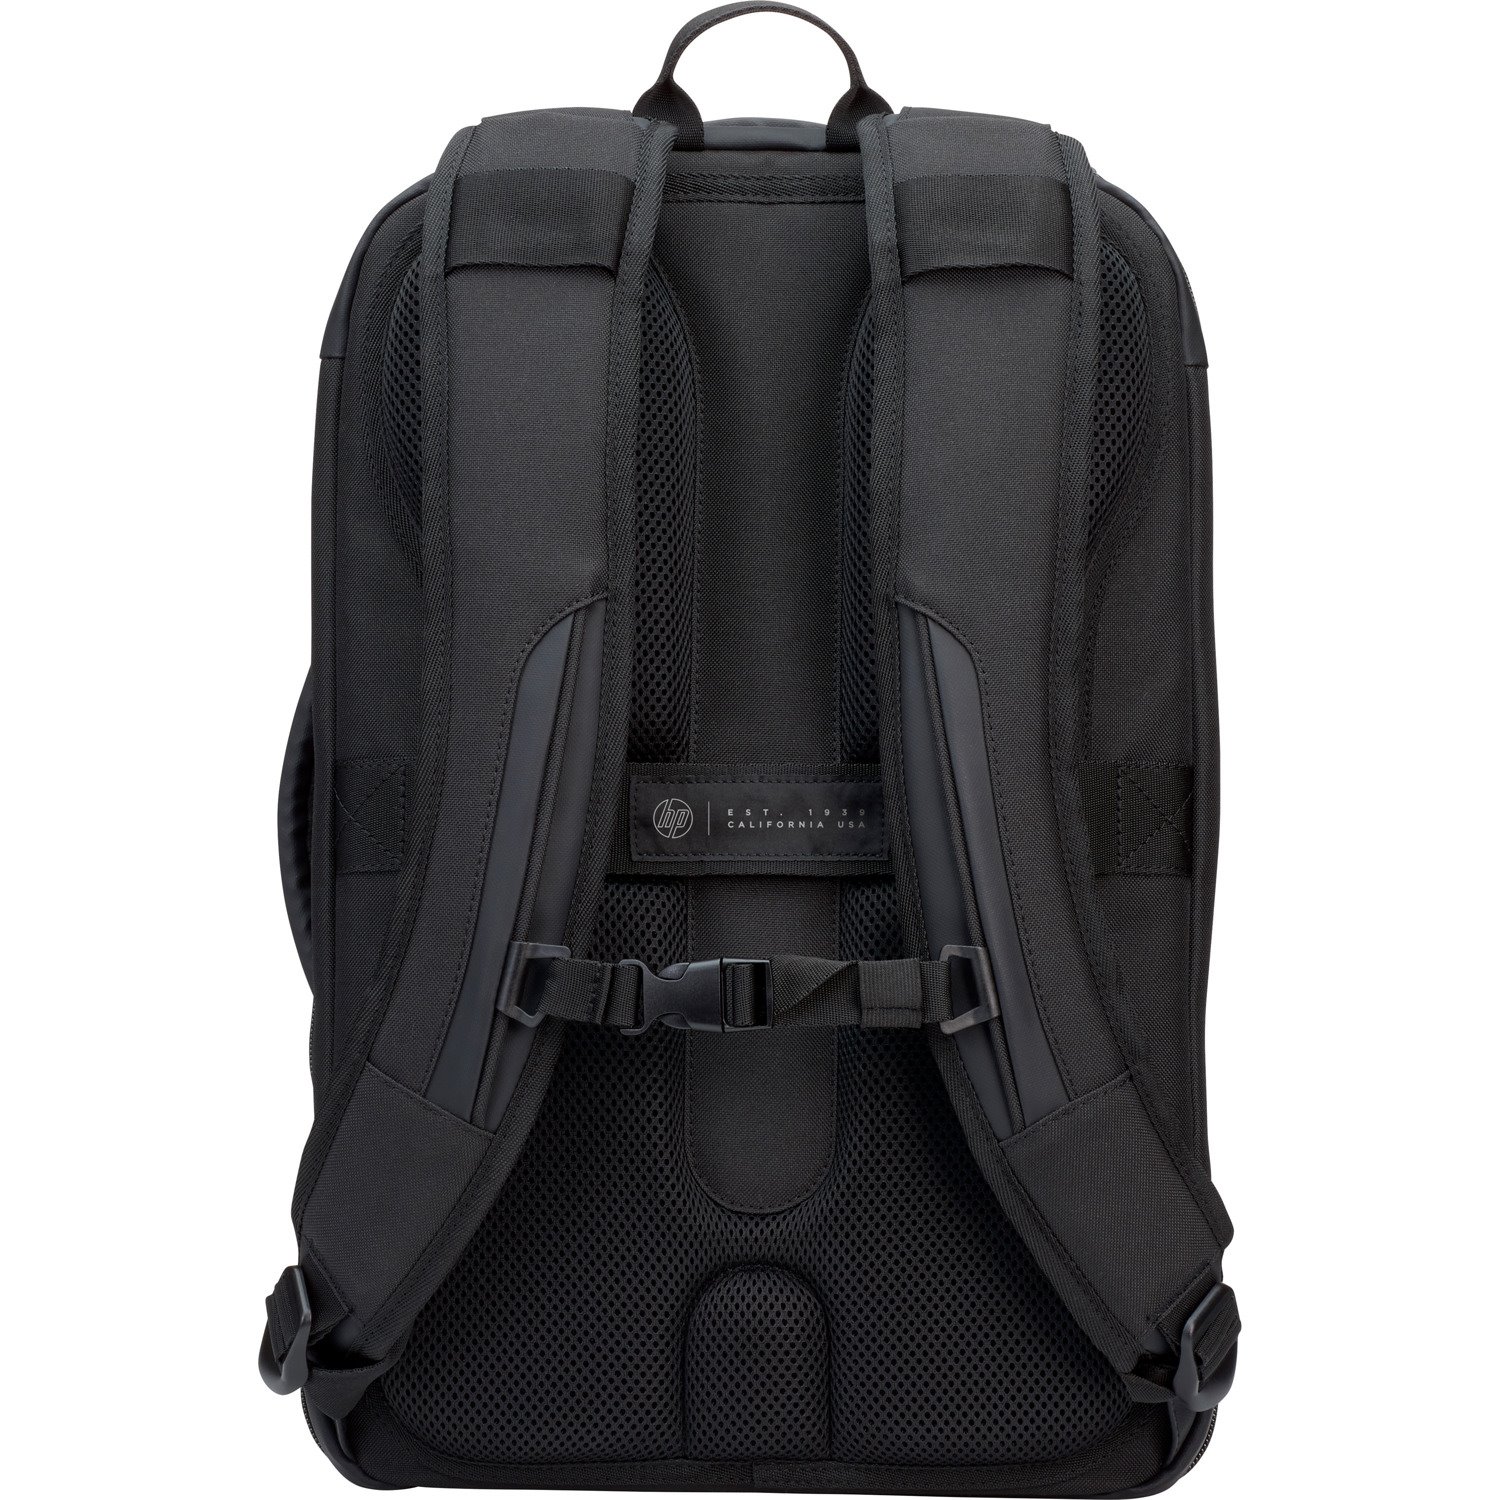 HP Recycled Carrying Case (Backpack) for 15.6" Notebook